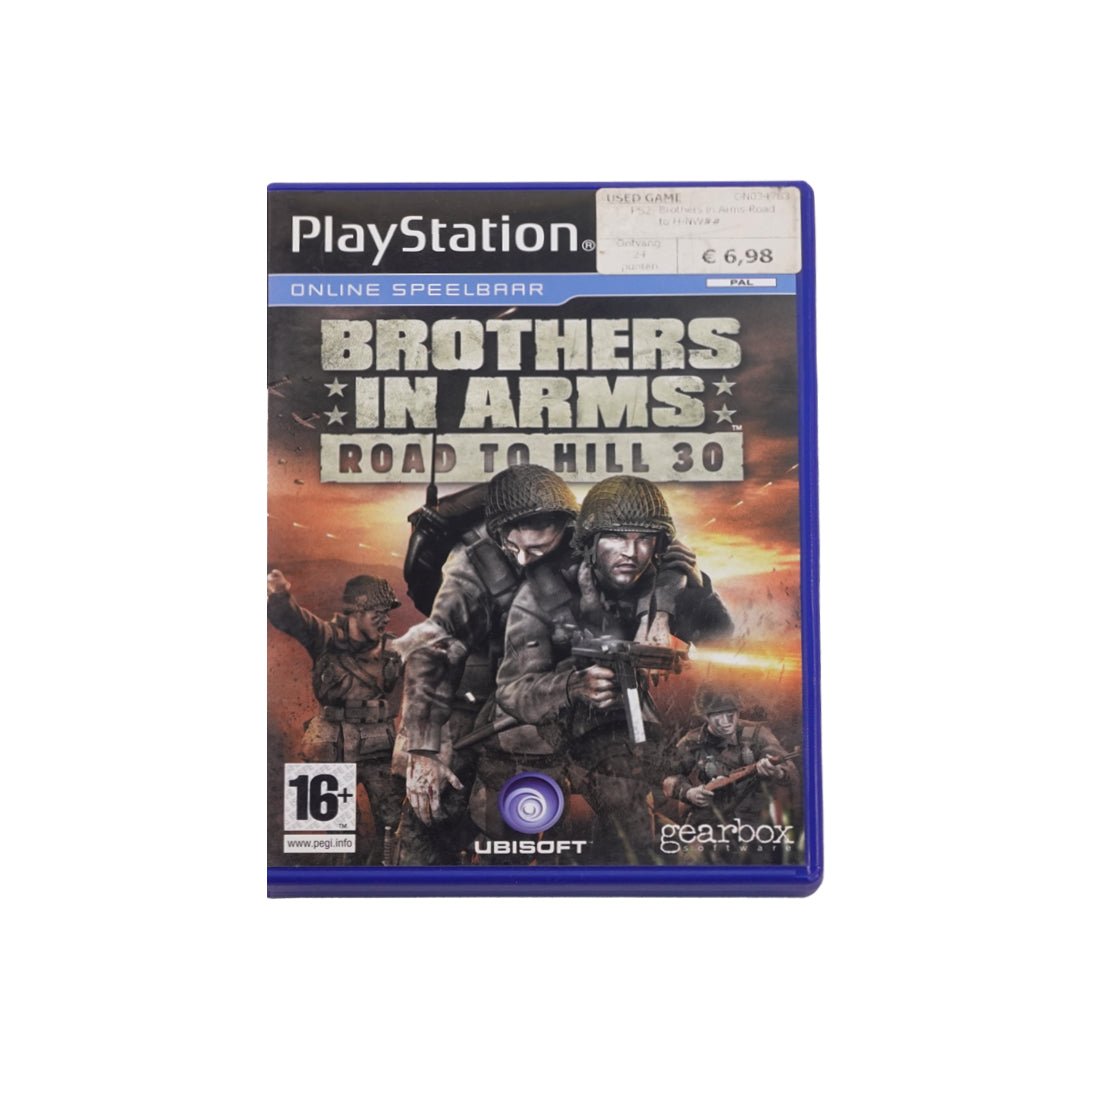 (Pre-Owned) Brother in Arms: Road to Hill 30 - PlayStation 2 - Store 974 | ستور ٩٧٤